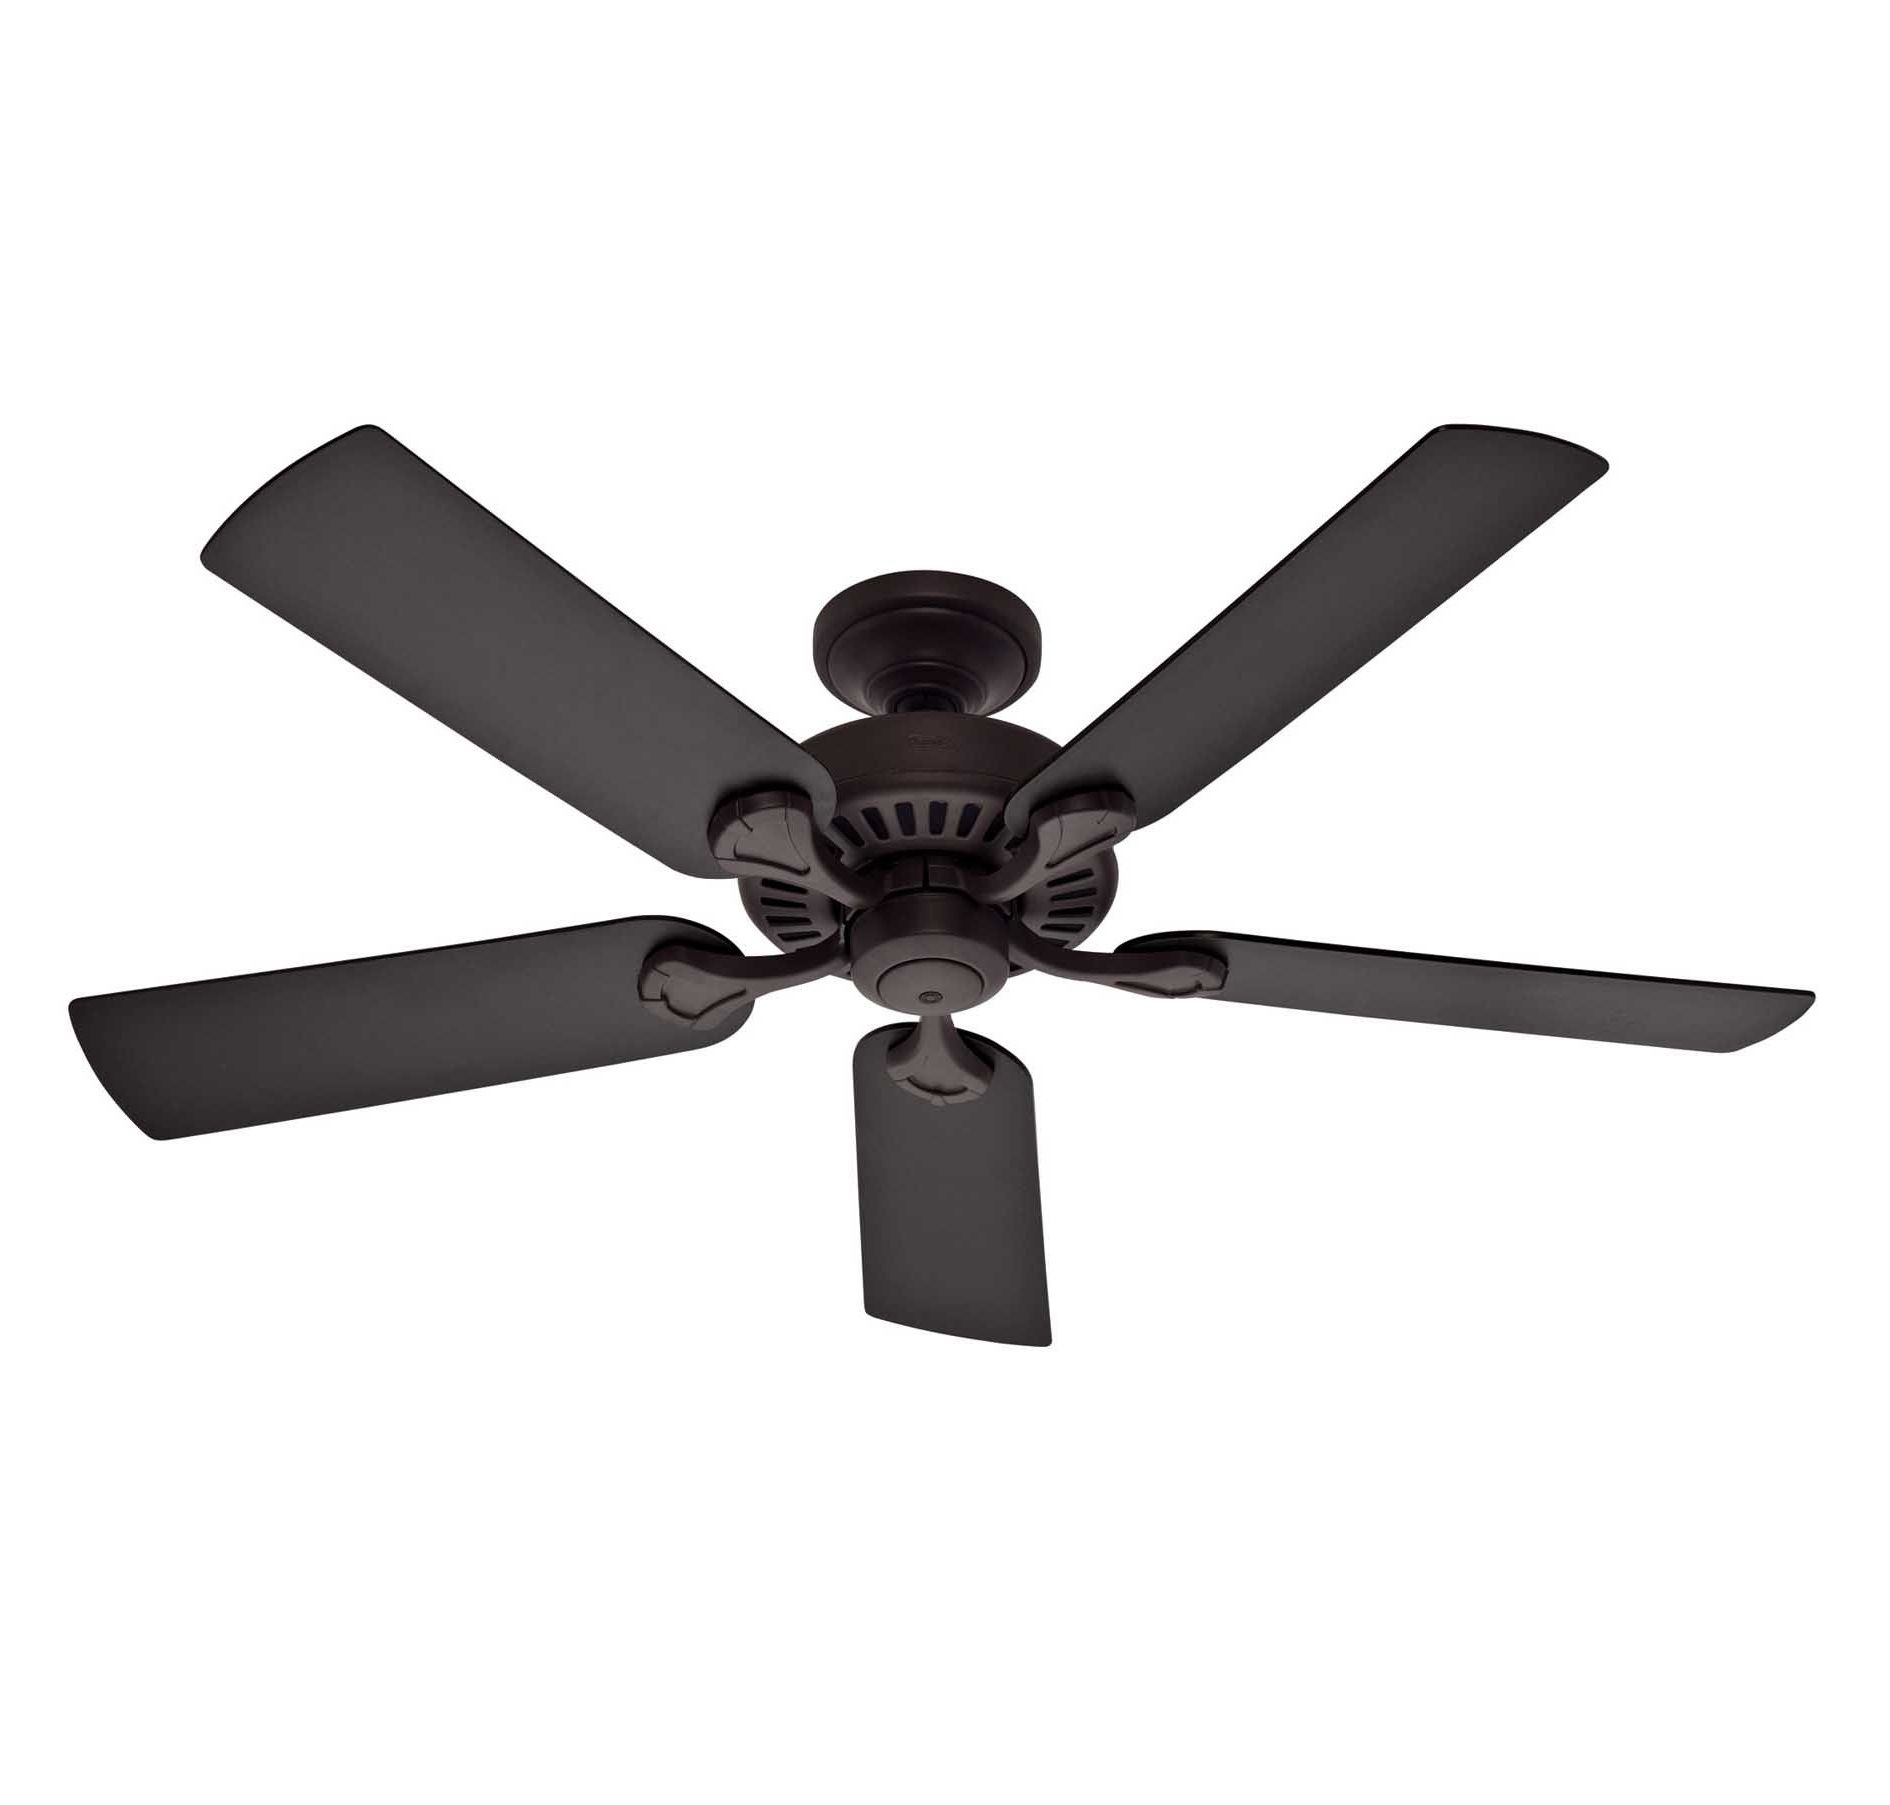 Deck Regarding Current Outdoor Ceiling Fans For Porches (View 14 of 20)